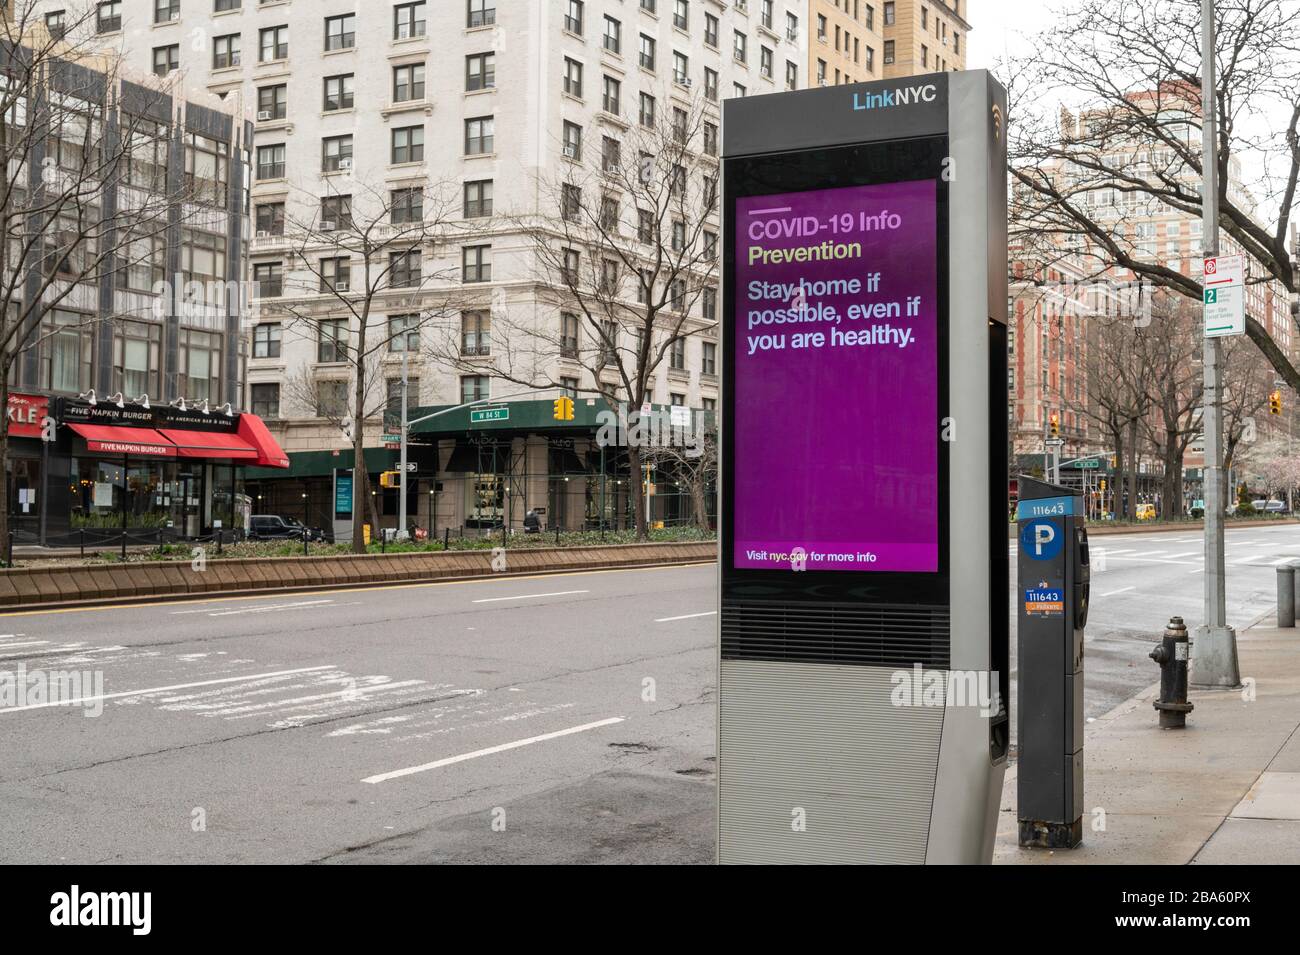 NEW YORK, NY - MARCH 25, 2020. Public Service messages regarding the Coronavirus outbreak are displayed on a LinkNYC kiosk on the Upper West Side of Manhattan in New York City. The World Health Organization declared coronavirus (COVID-19) a global pandemic on March 11th. Stock Photo